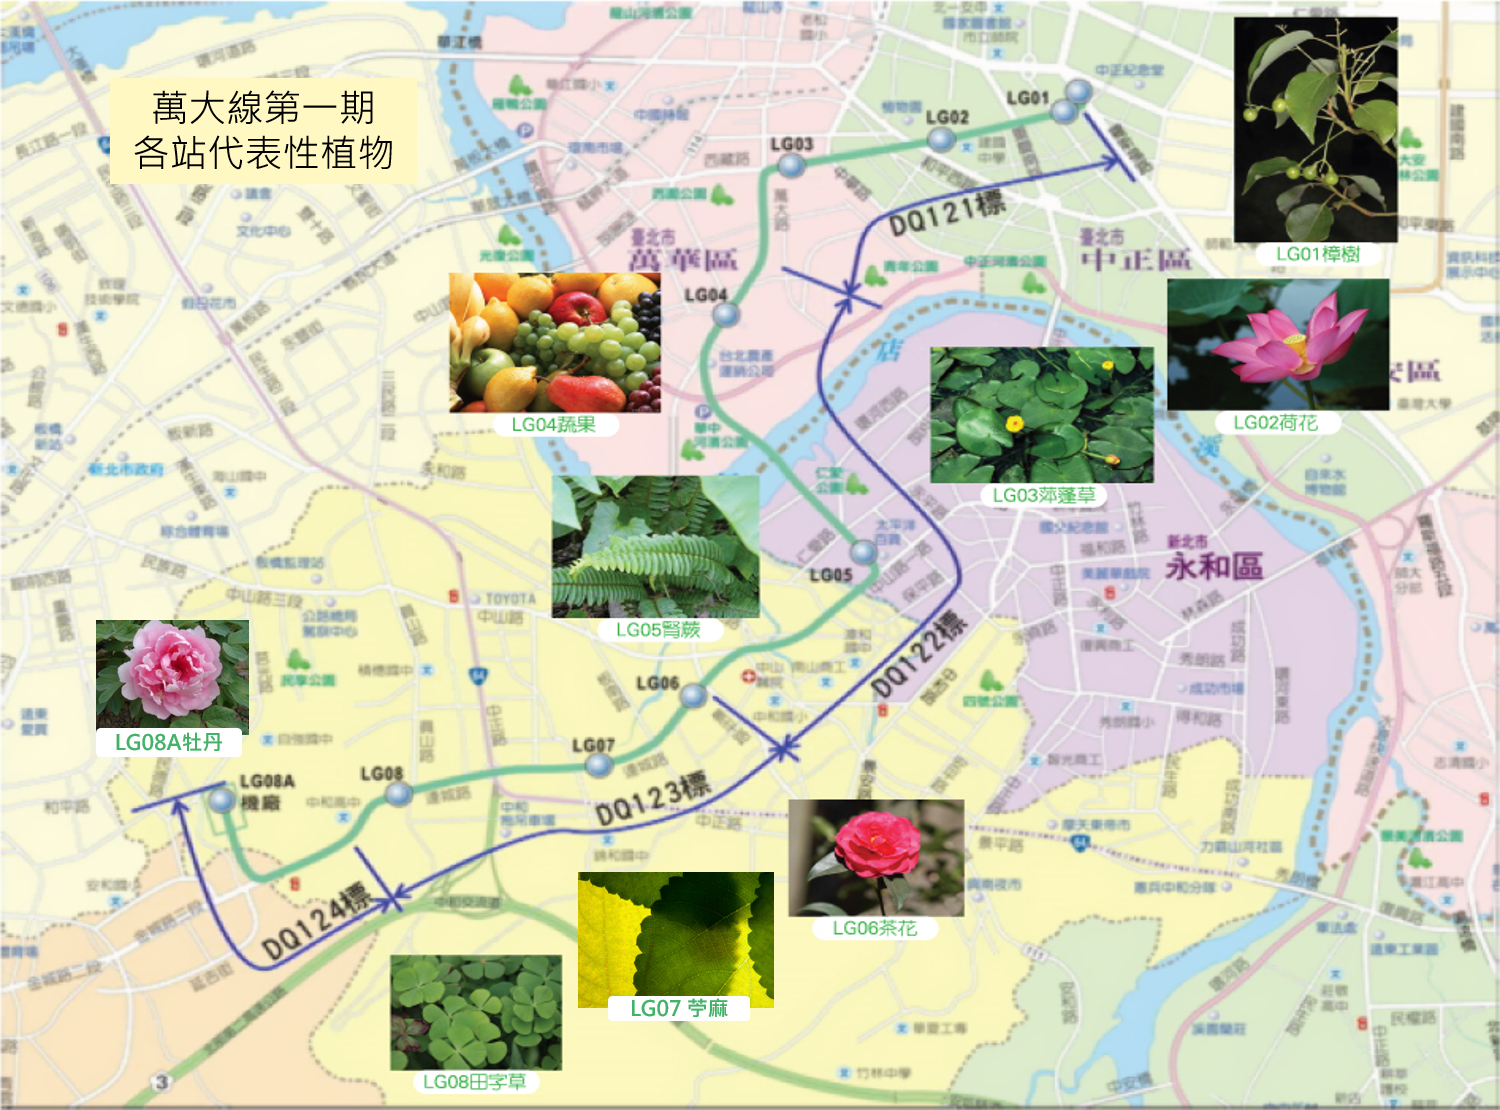 Image of representative plants for each station in the Wanda line Phase I